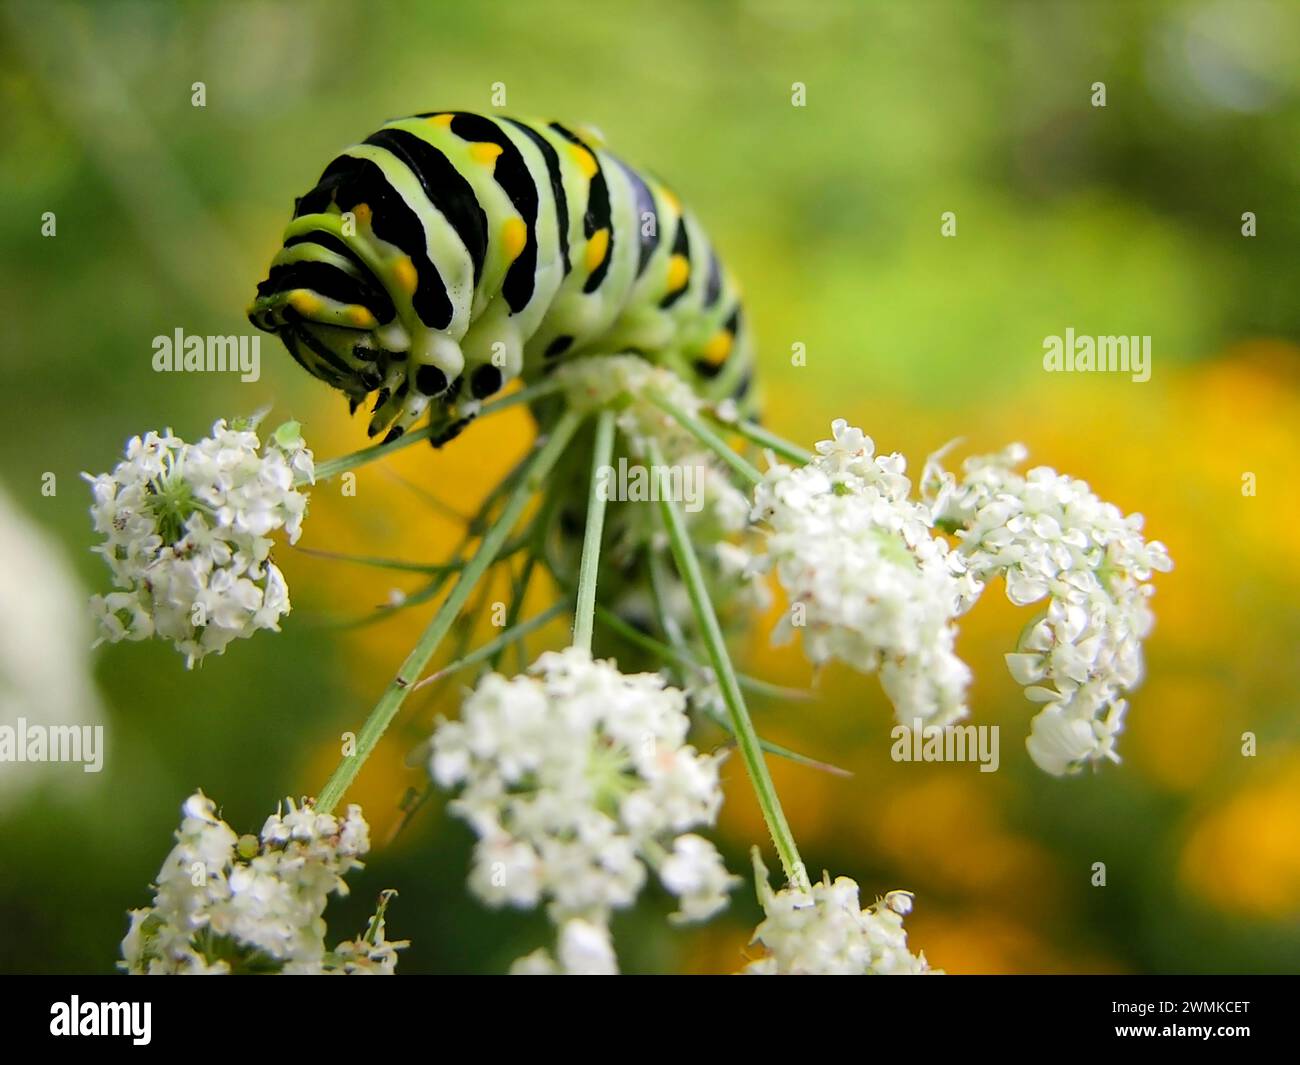 Parsley worm Caterpillar (Papilio polyxenes) crawling over a blossoming plant Stock Photo